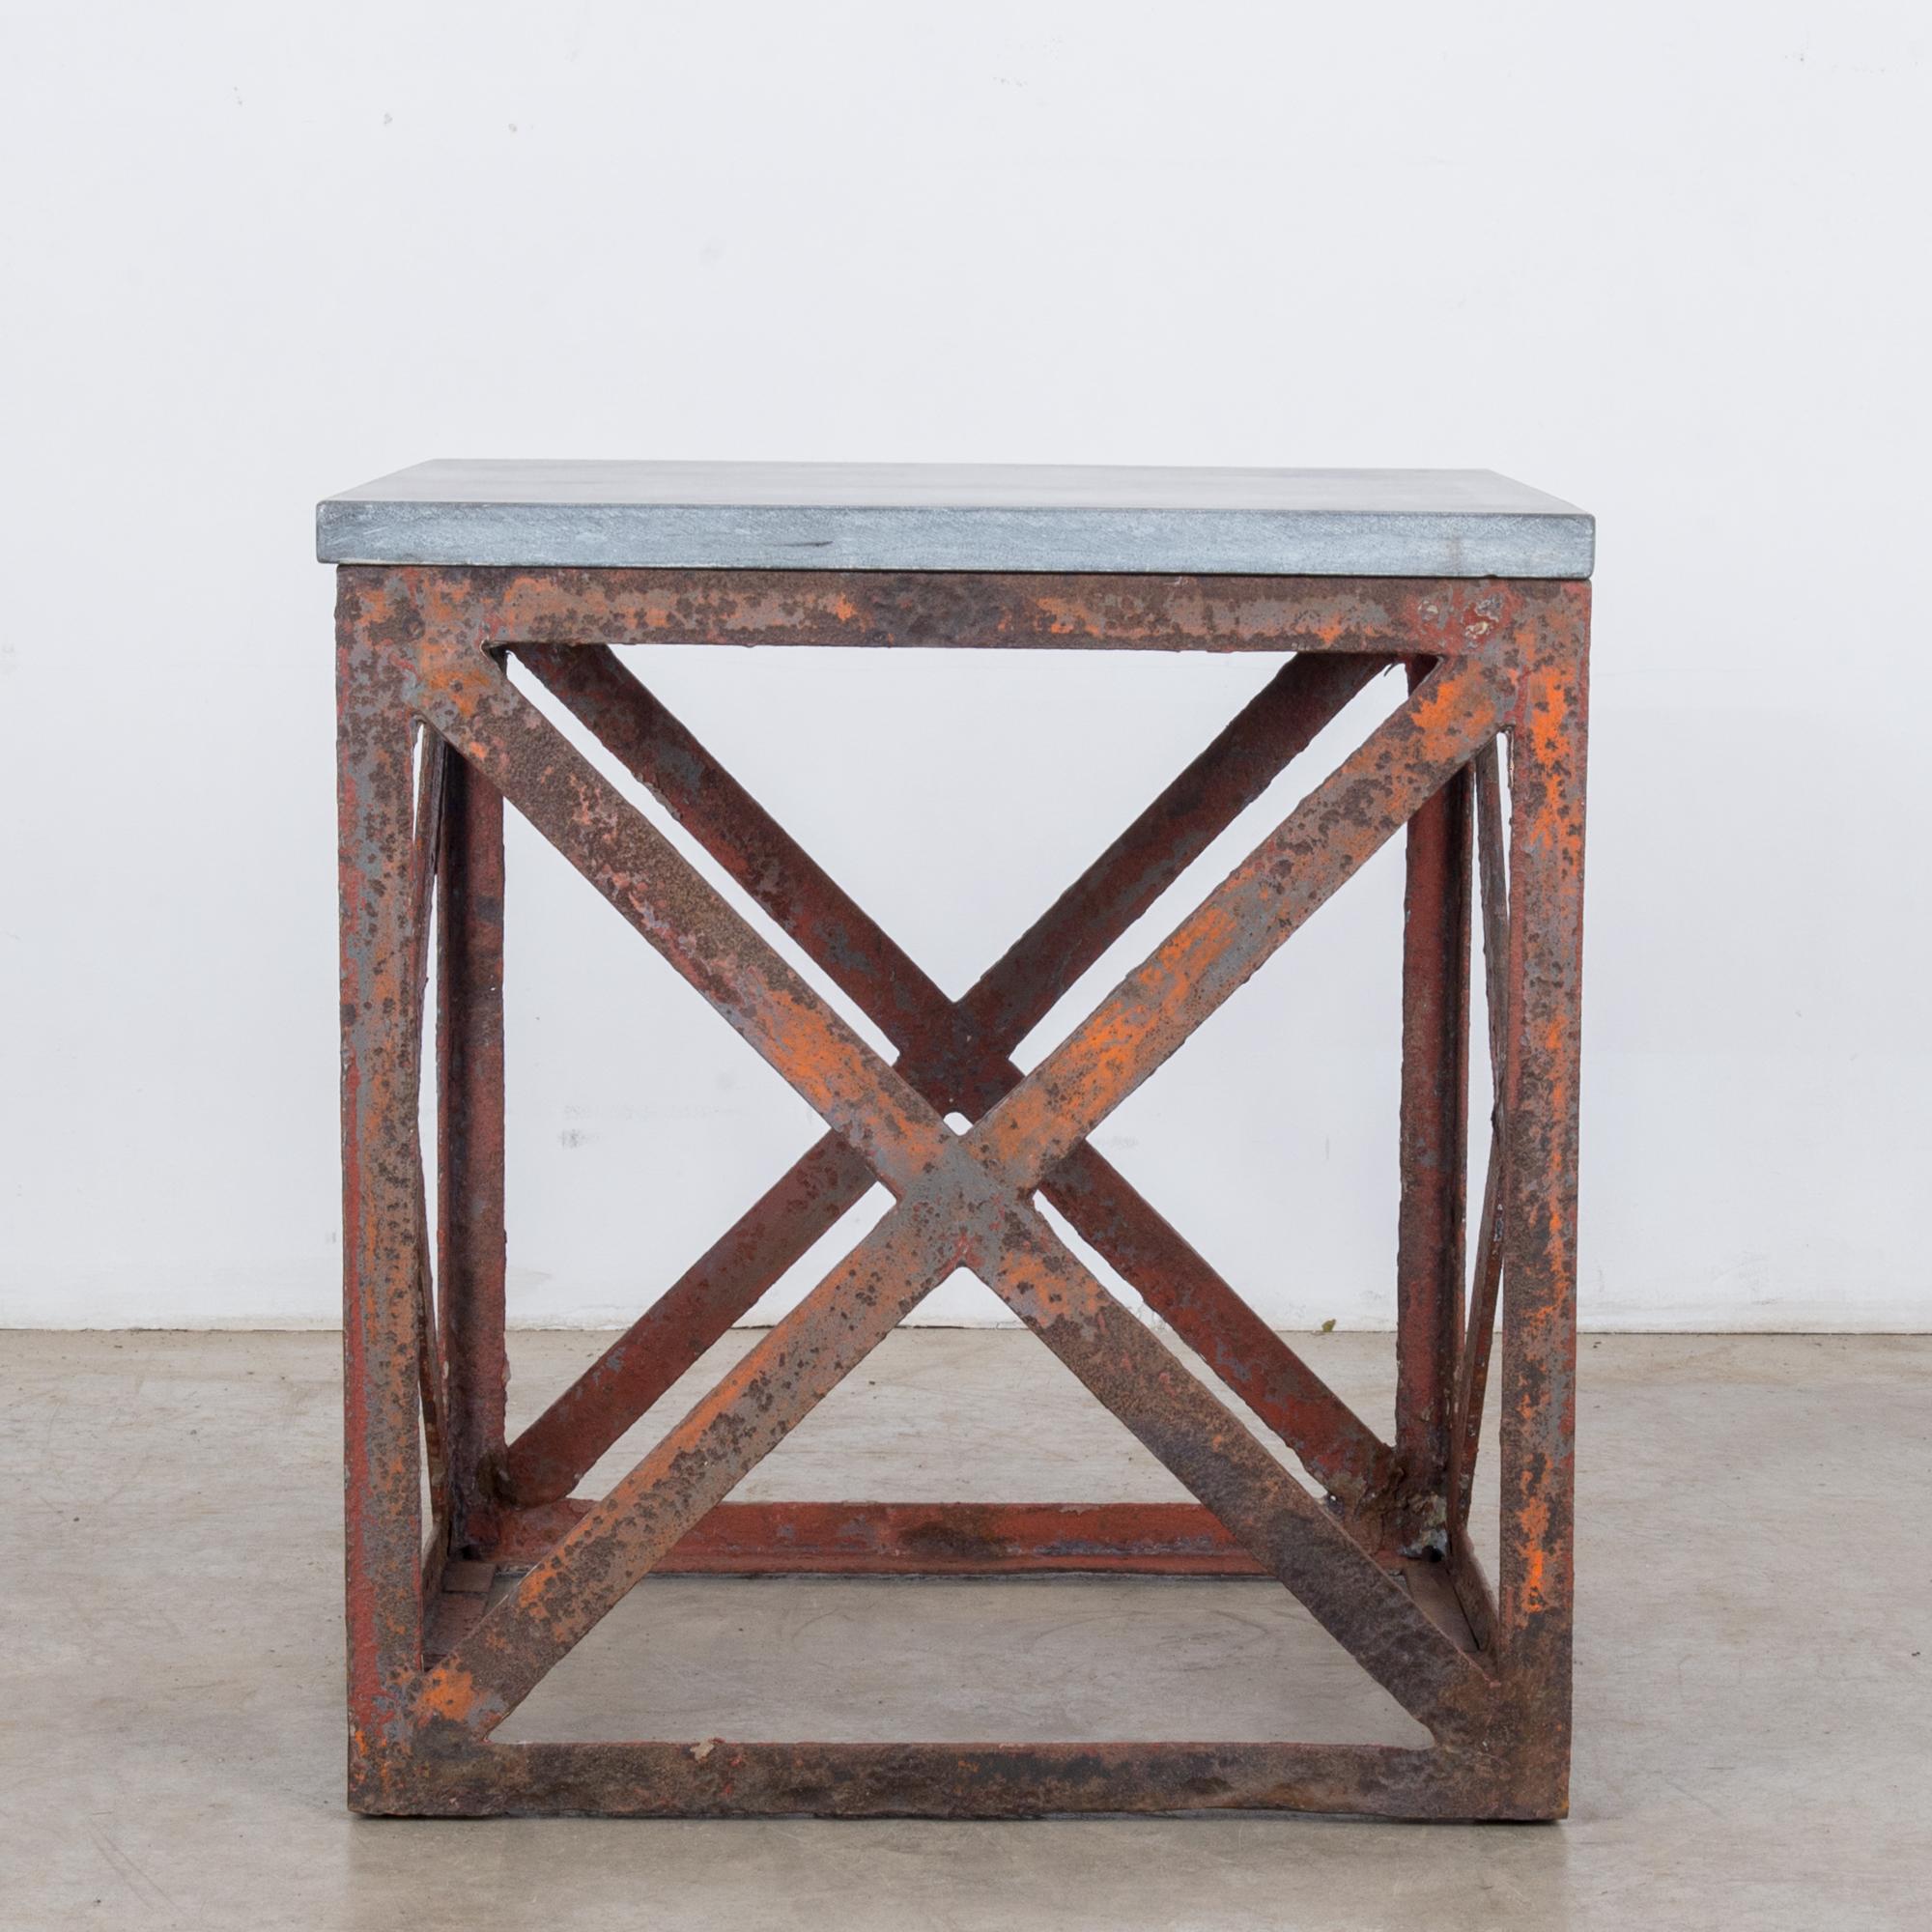 This square side table with a metal frame and a stone top was made in Belgium, circa 1920. The X-form stretchers on all sides accentuate the geometric nature of the table, and the cool gray stone top highlight the beautifully rusted patina of the